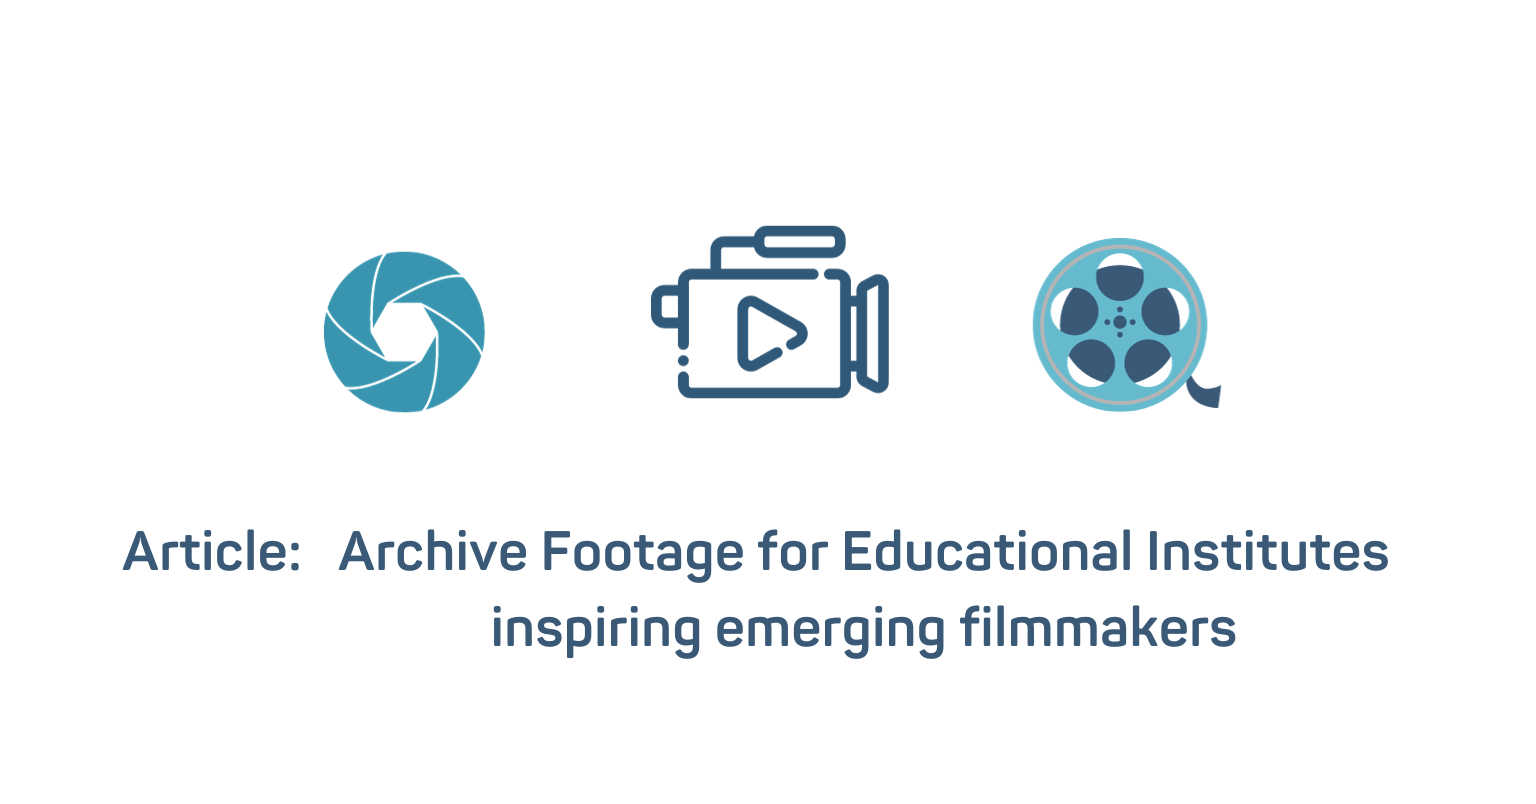 ARTICLE: ARCHIVE FOOTAGE FOR EDUCATIONAL INSTITUTES INSPIRING EMERGING FILMMAKERS